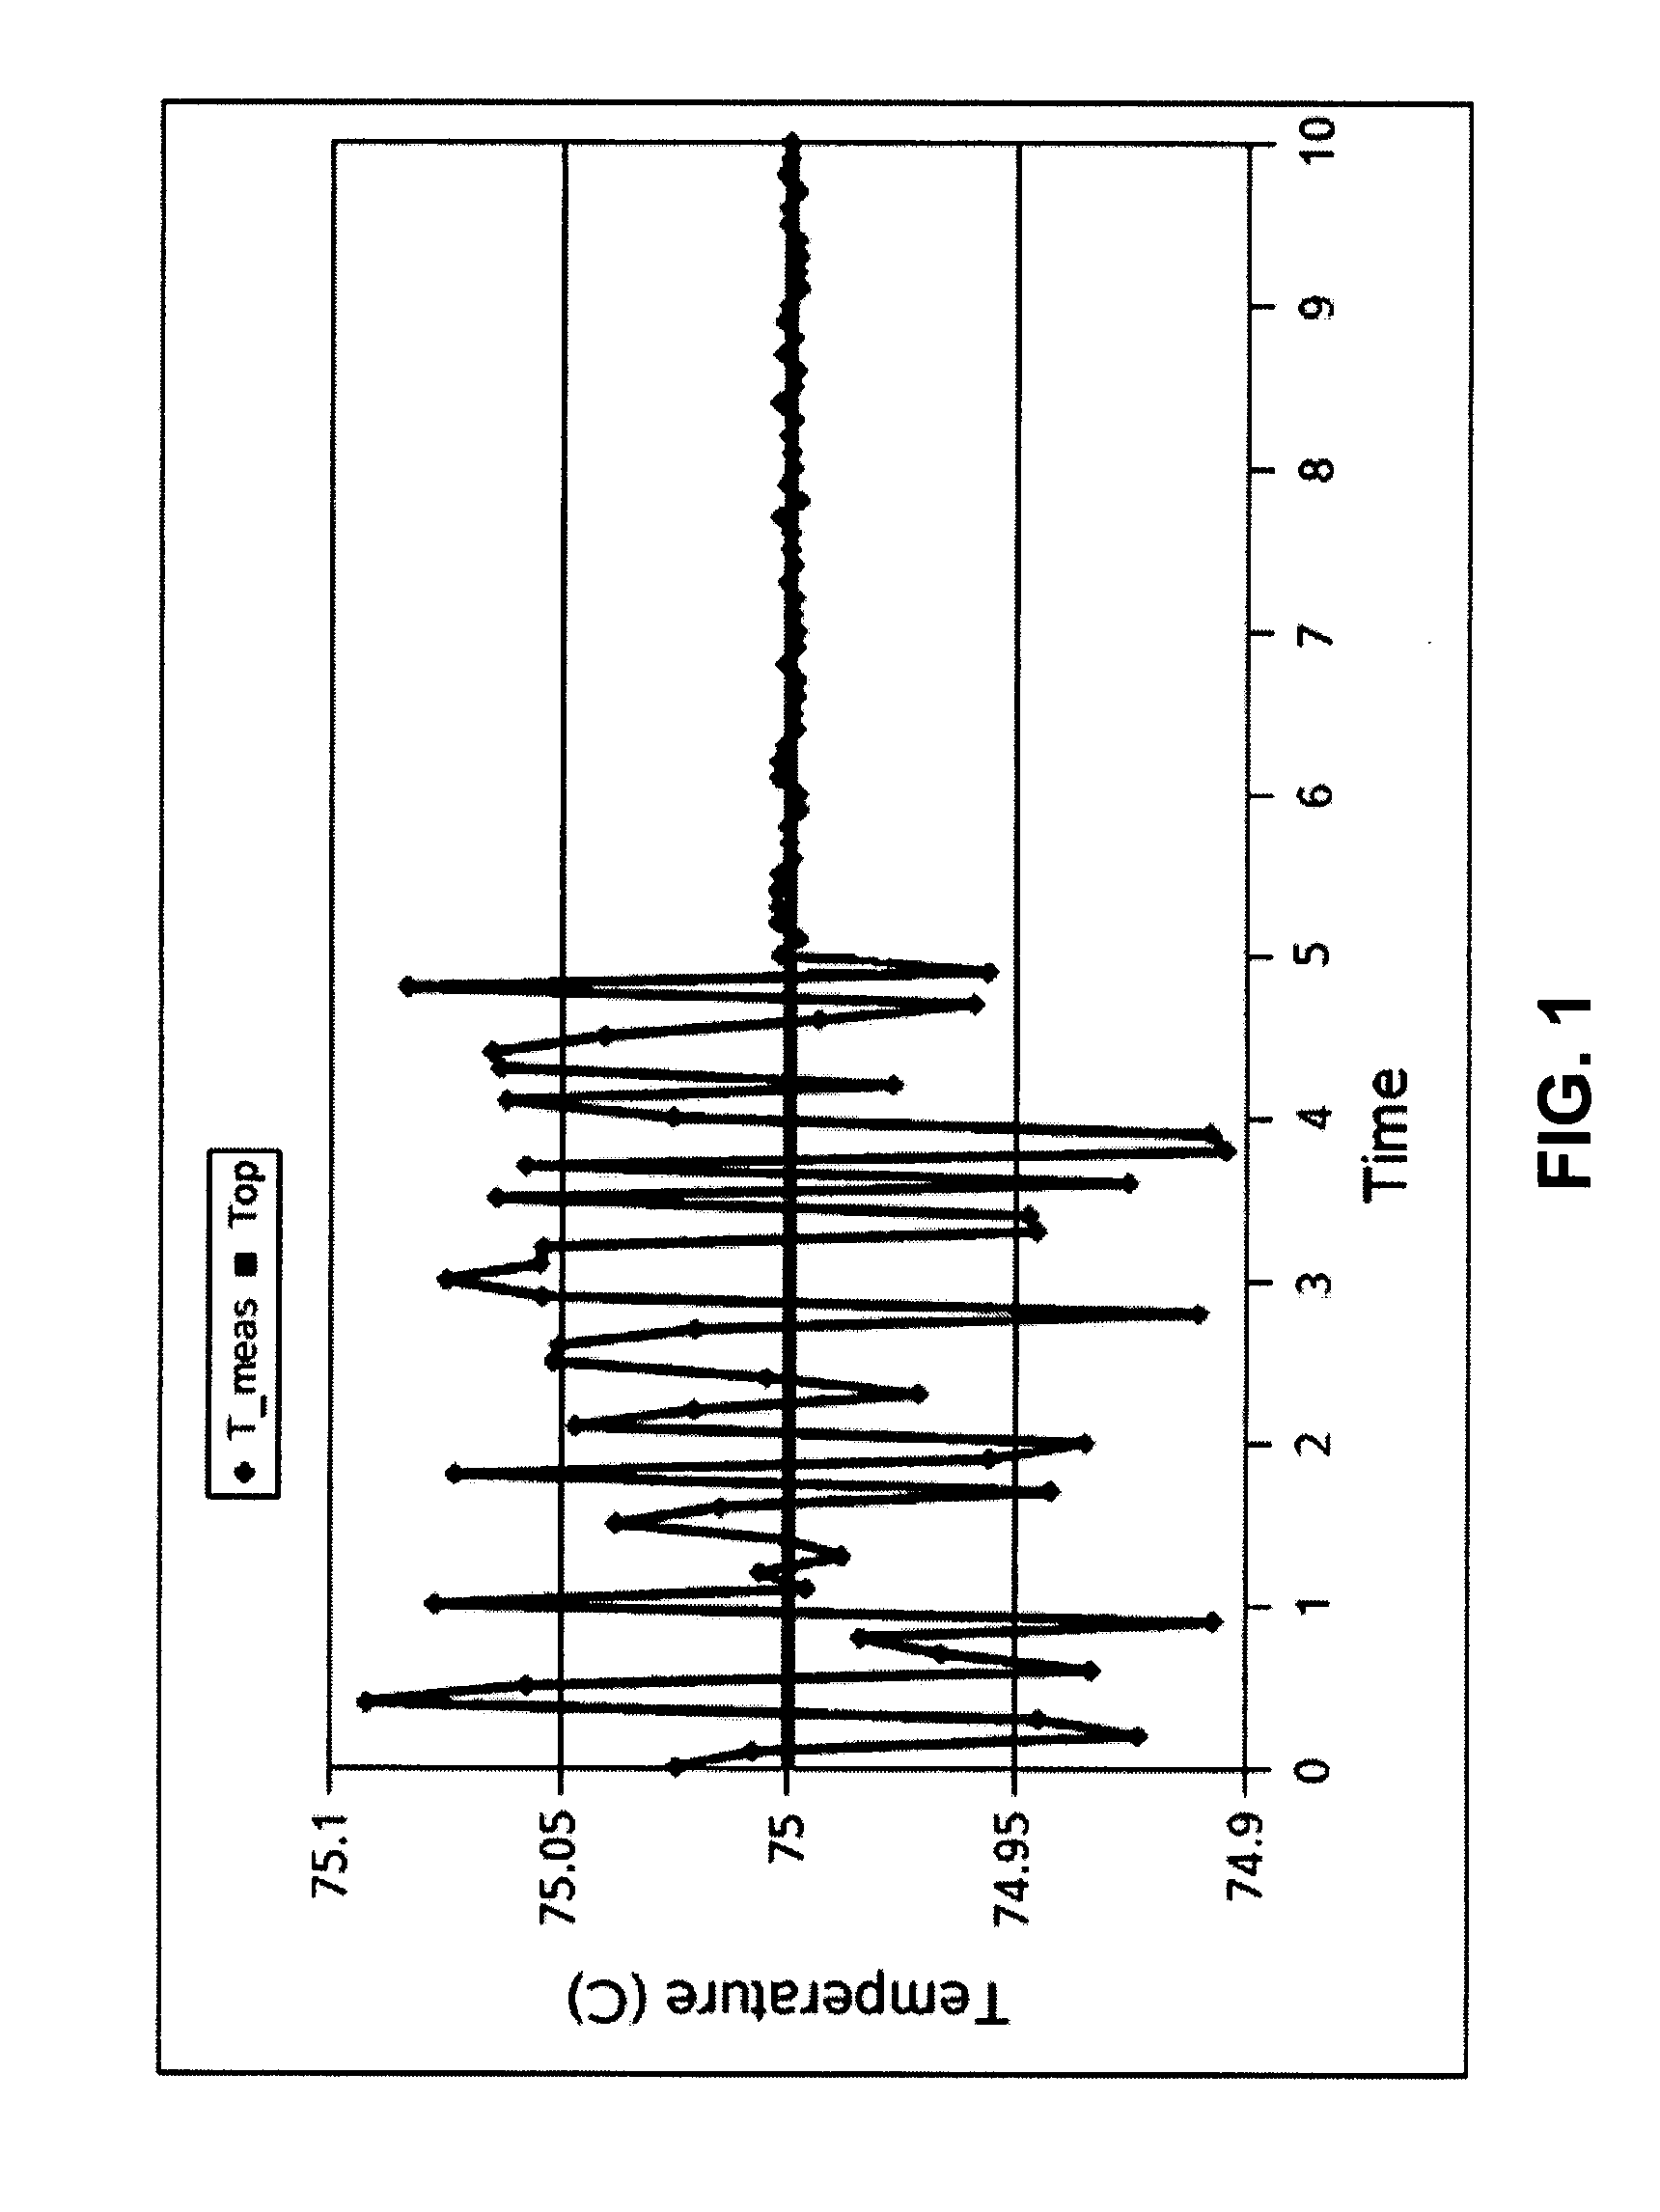 Method and apparatus for monitoring the health of a computer system